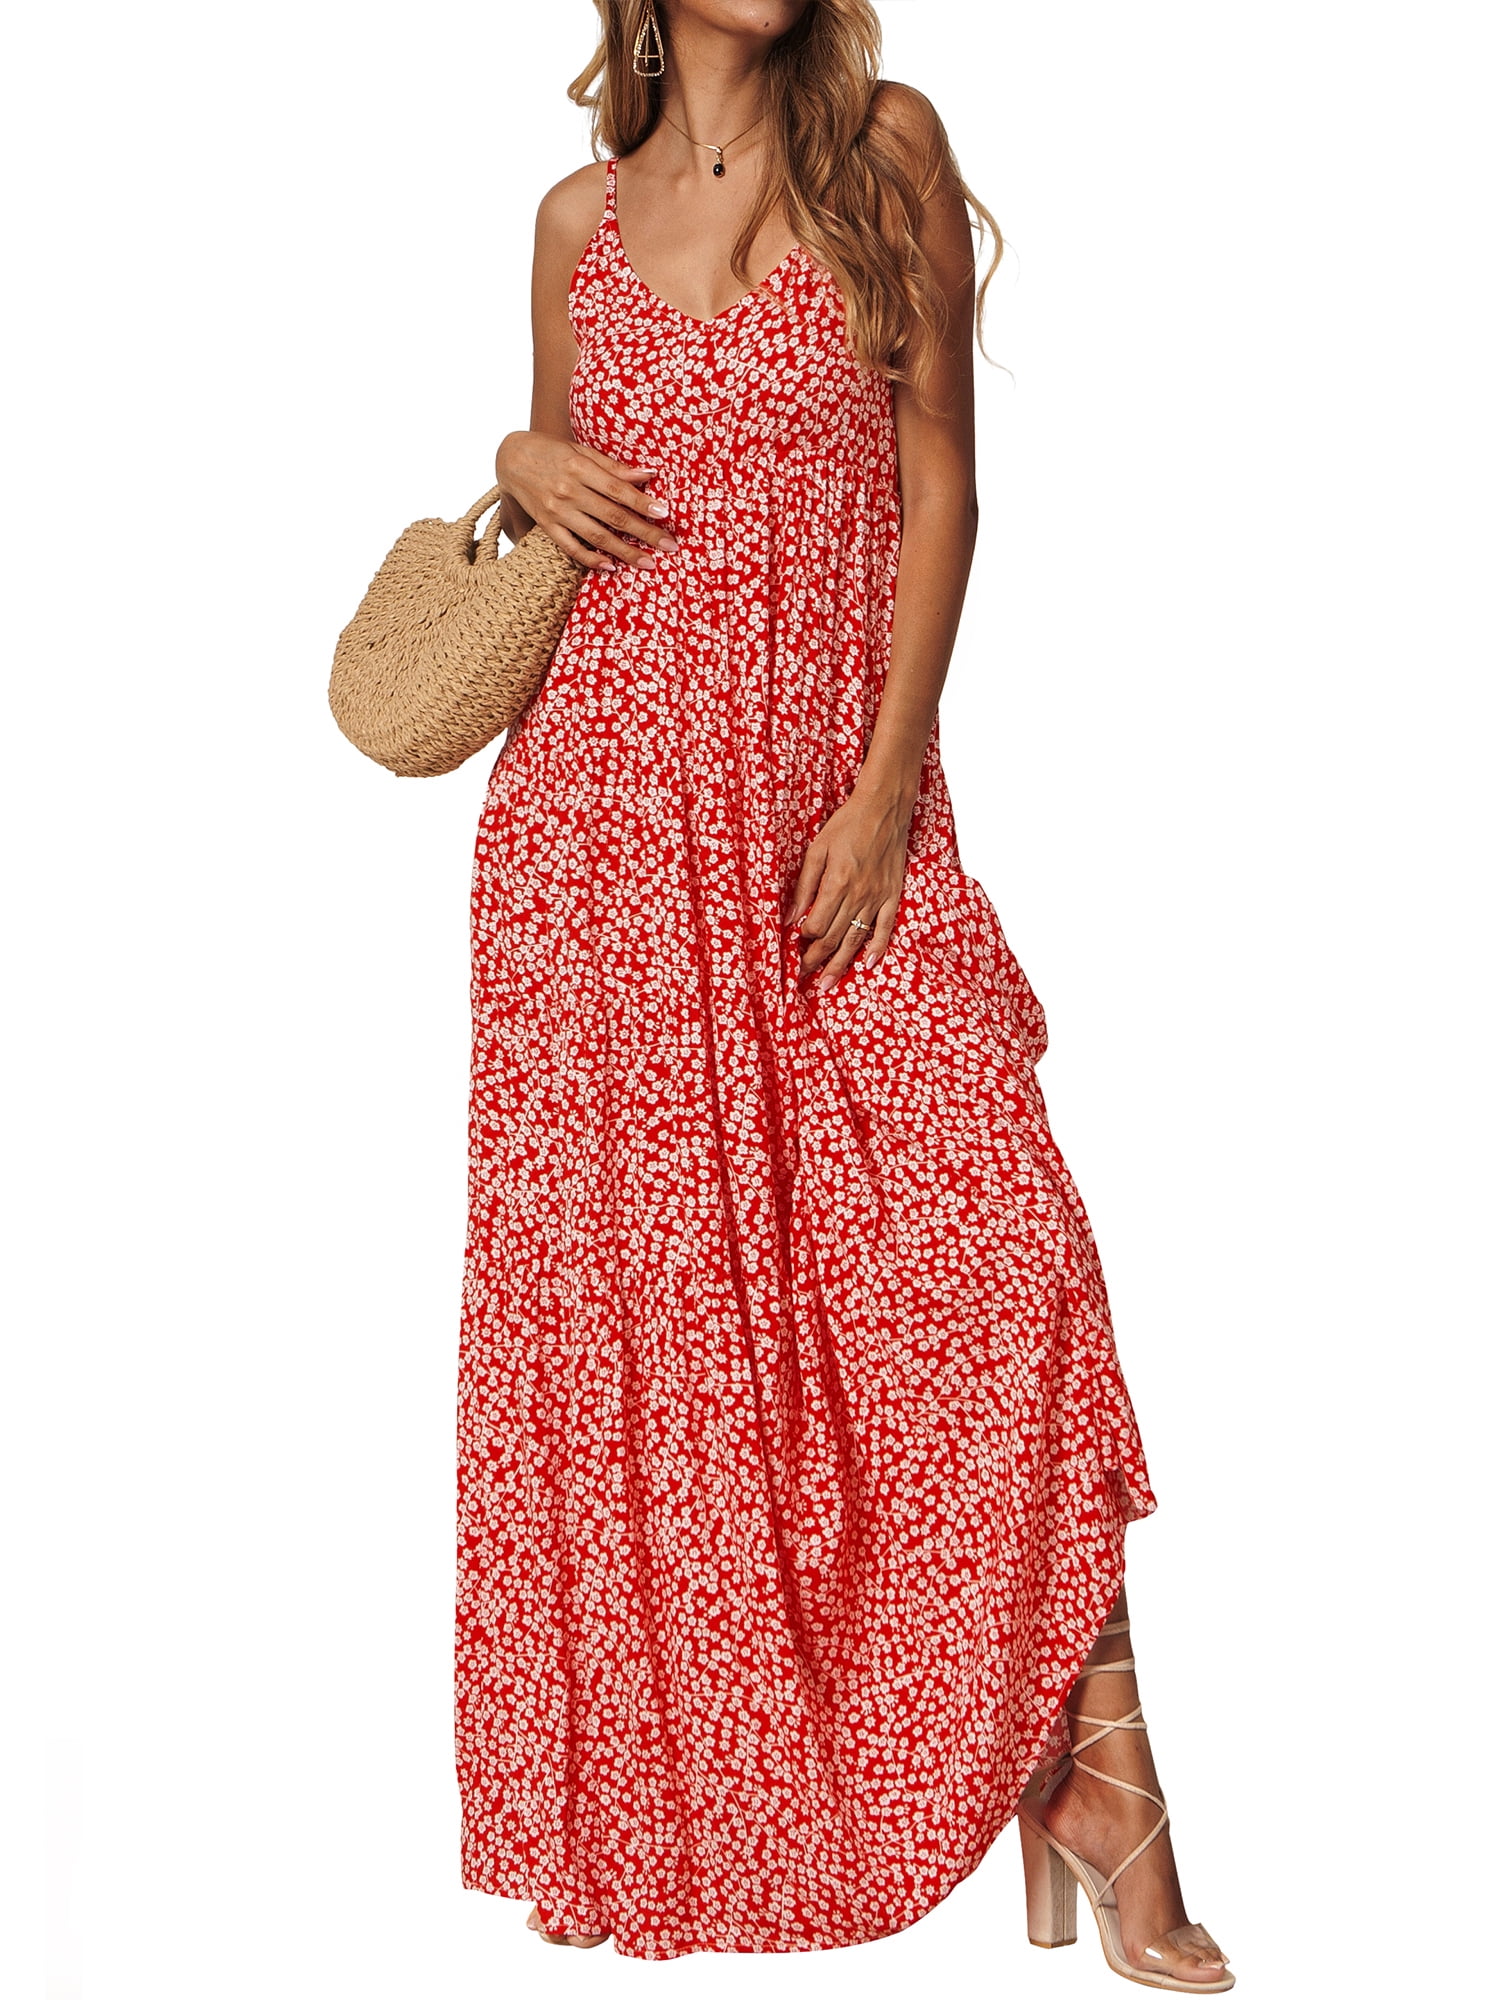 Women Sleeveless Strappy Stretch Top Ladies Frill Floral Print Design Maxi Dress 